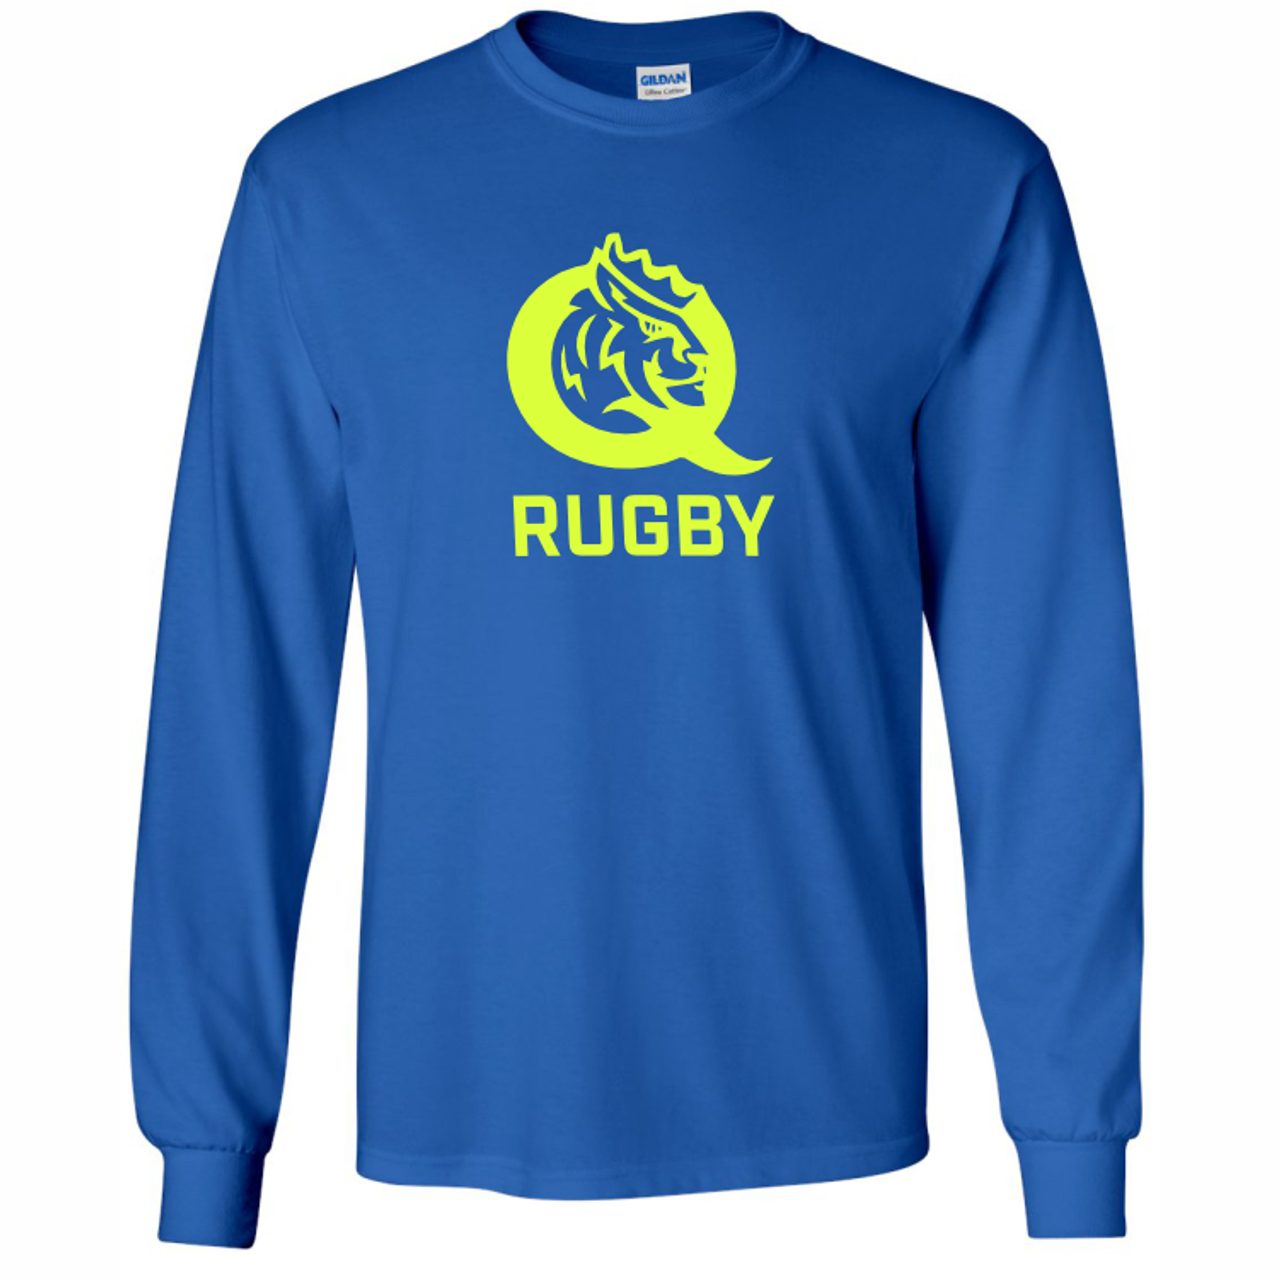 Queens University of Charlotte Rugby 50/50 Tee, Royal